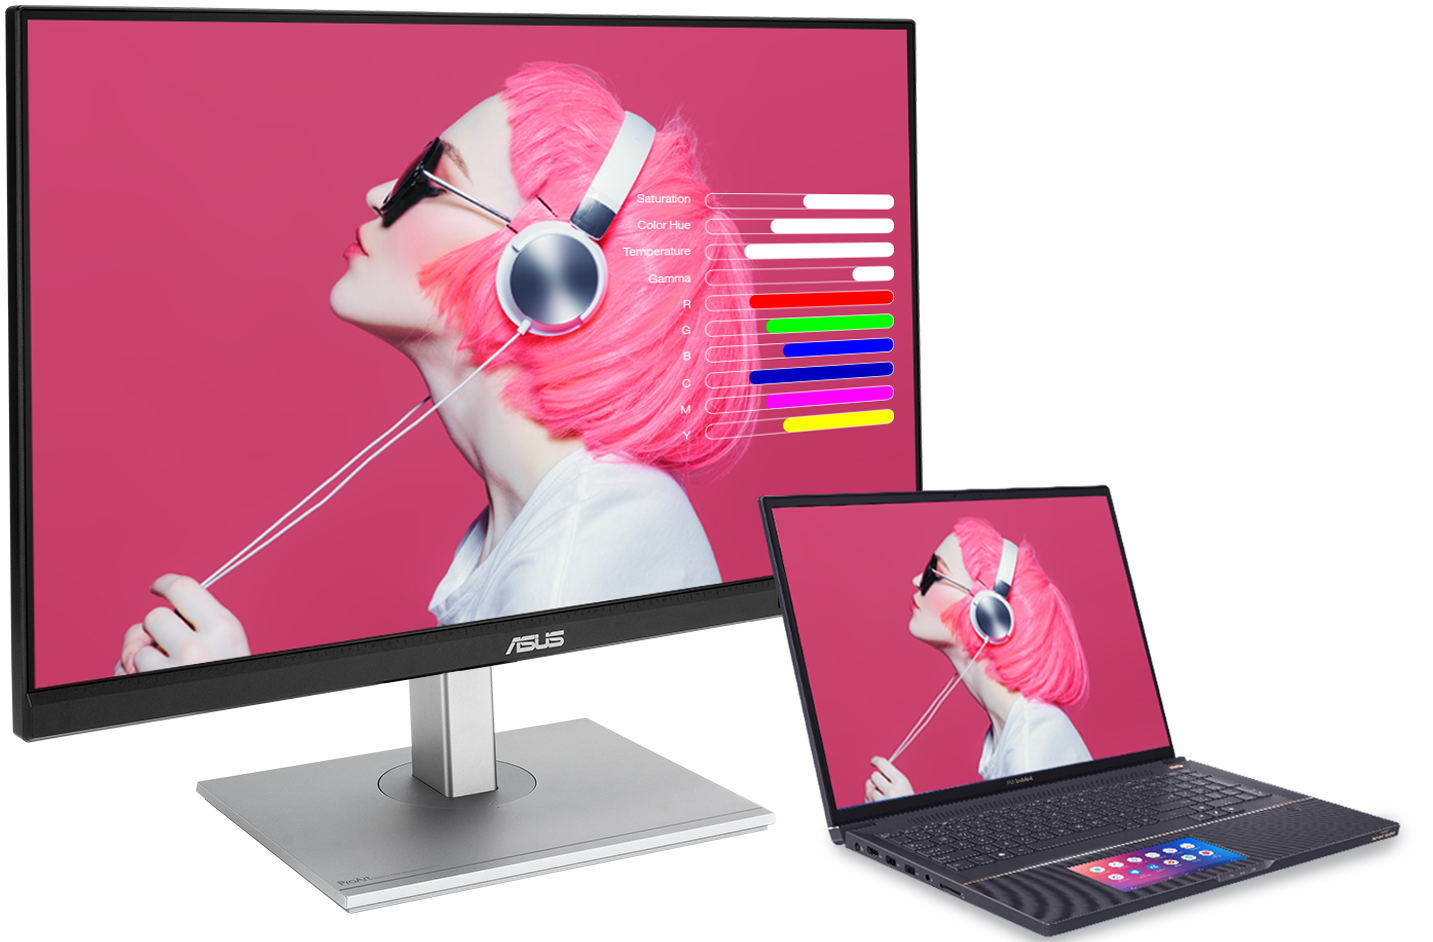 ASUS ProArt Display PA247CV provides personalized editing experience